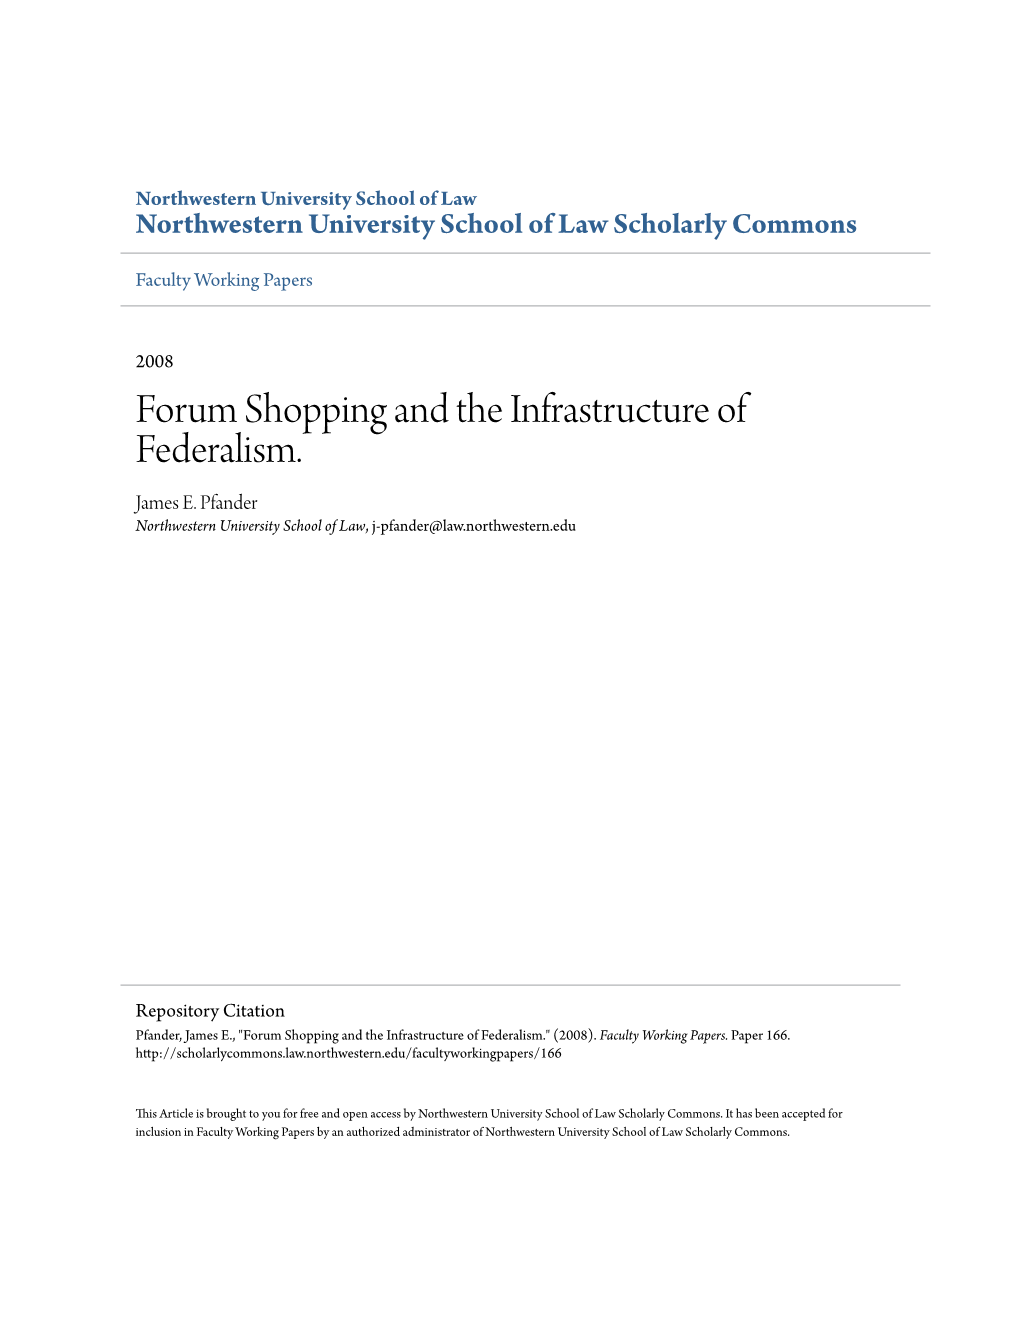 Forum Shopping and the Infrastructure of Federalism. James E